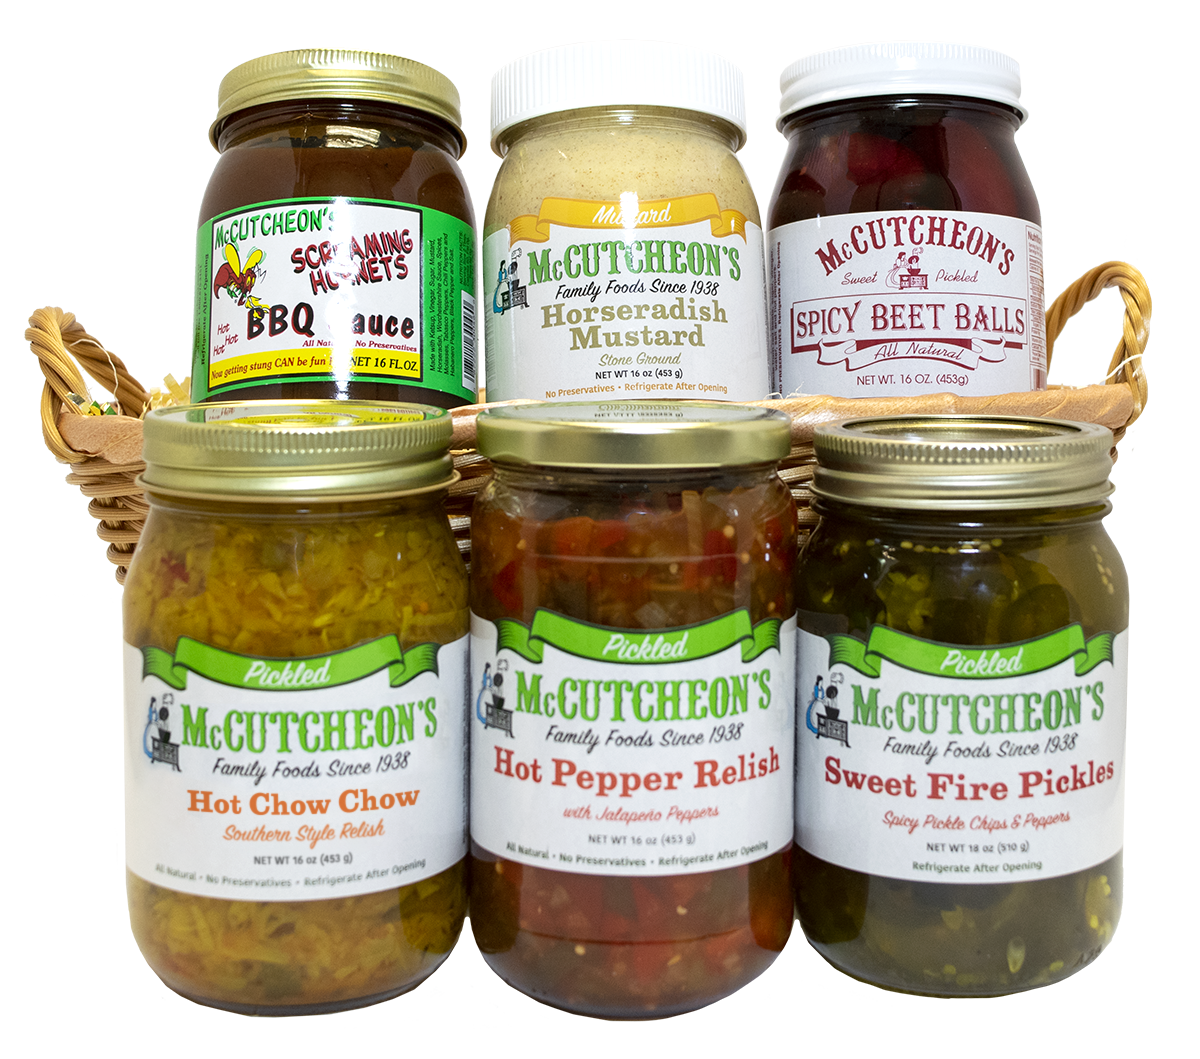 basket of Sweet Fire Pickles, Screaming Hornets Barbeque Sauce, Hot Pepper Relish, Horseradish Mustard, Spicy Beet Balls, and Hot Chow Chow